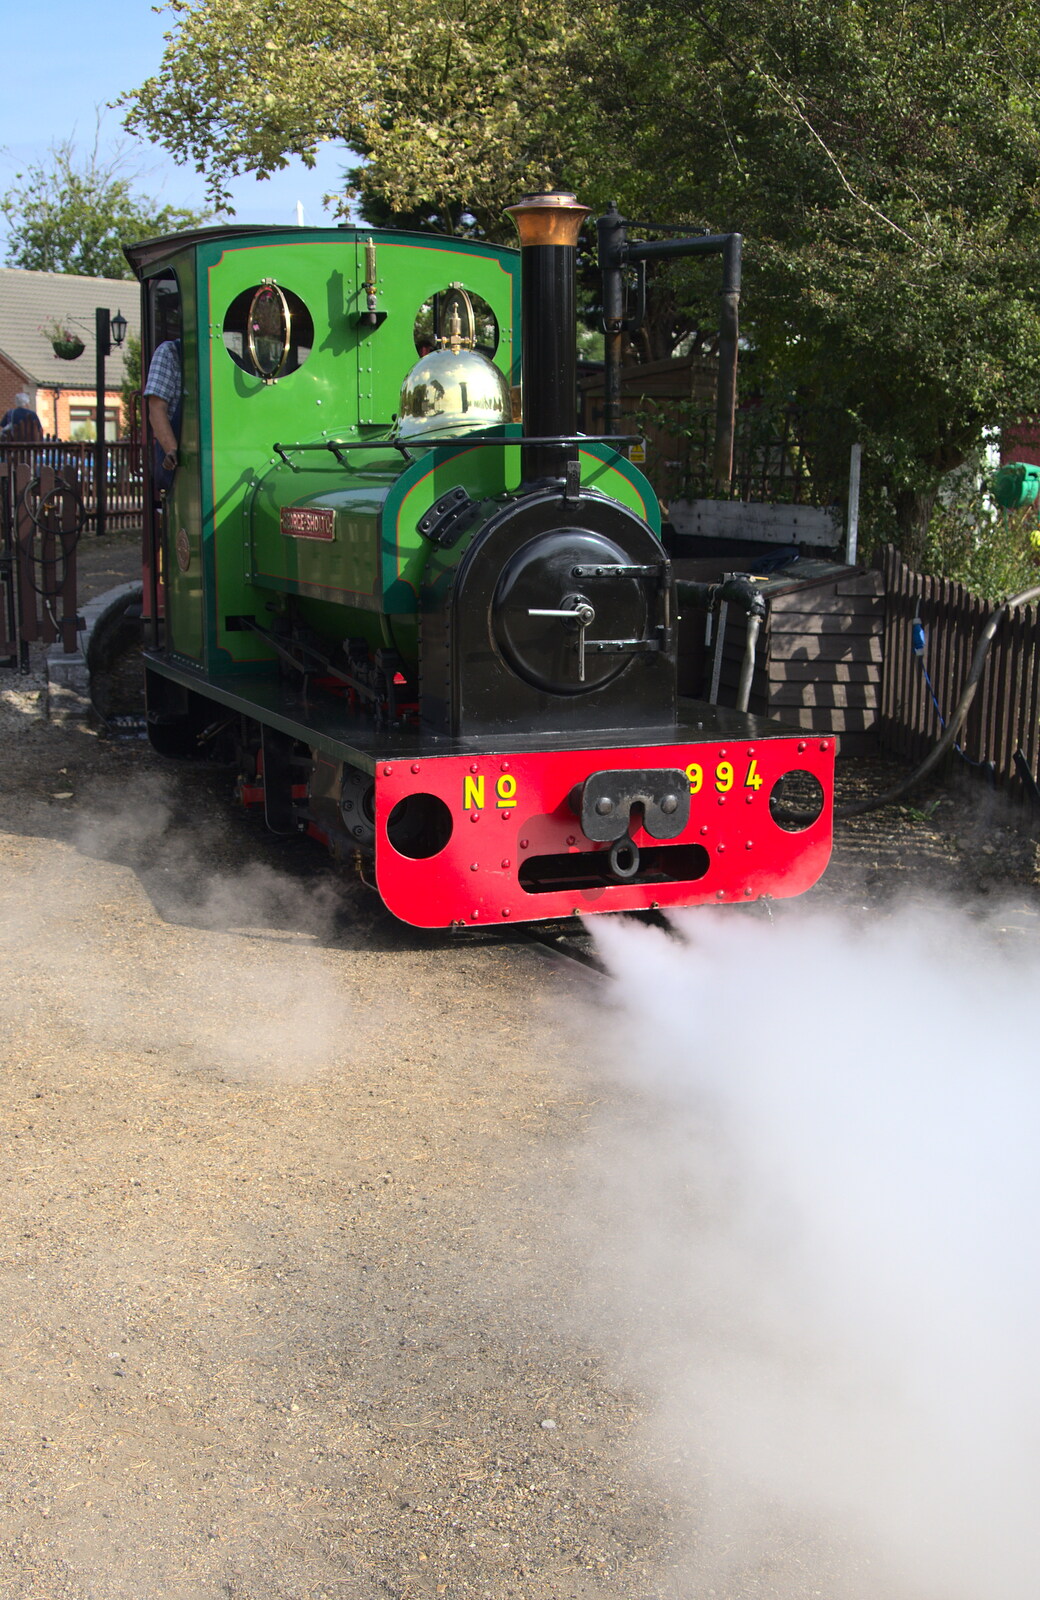 The George Sholto gets its steam on from A Trip to Bressingham Steam Museum, Bressingham, Norfolk - 28th September 2014